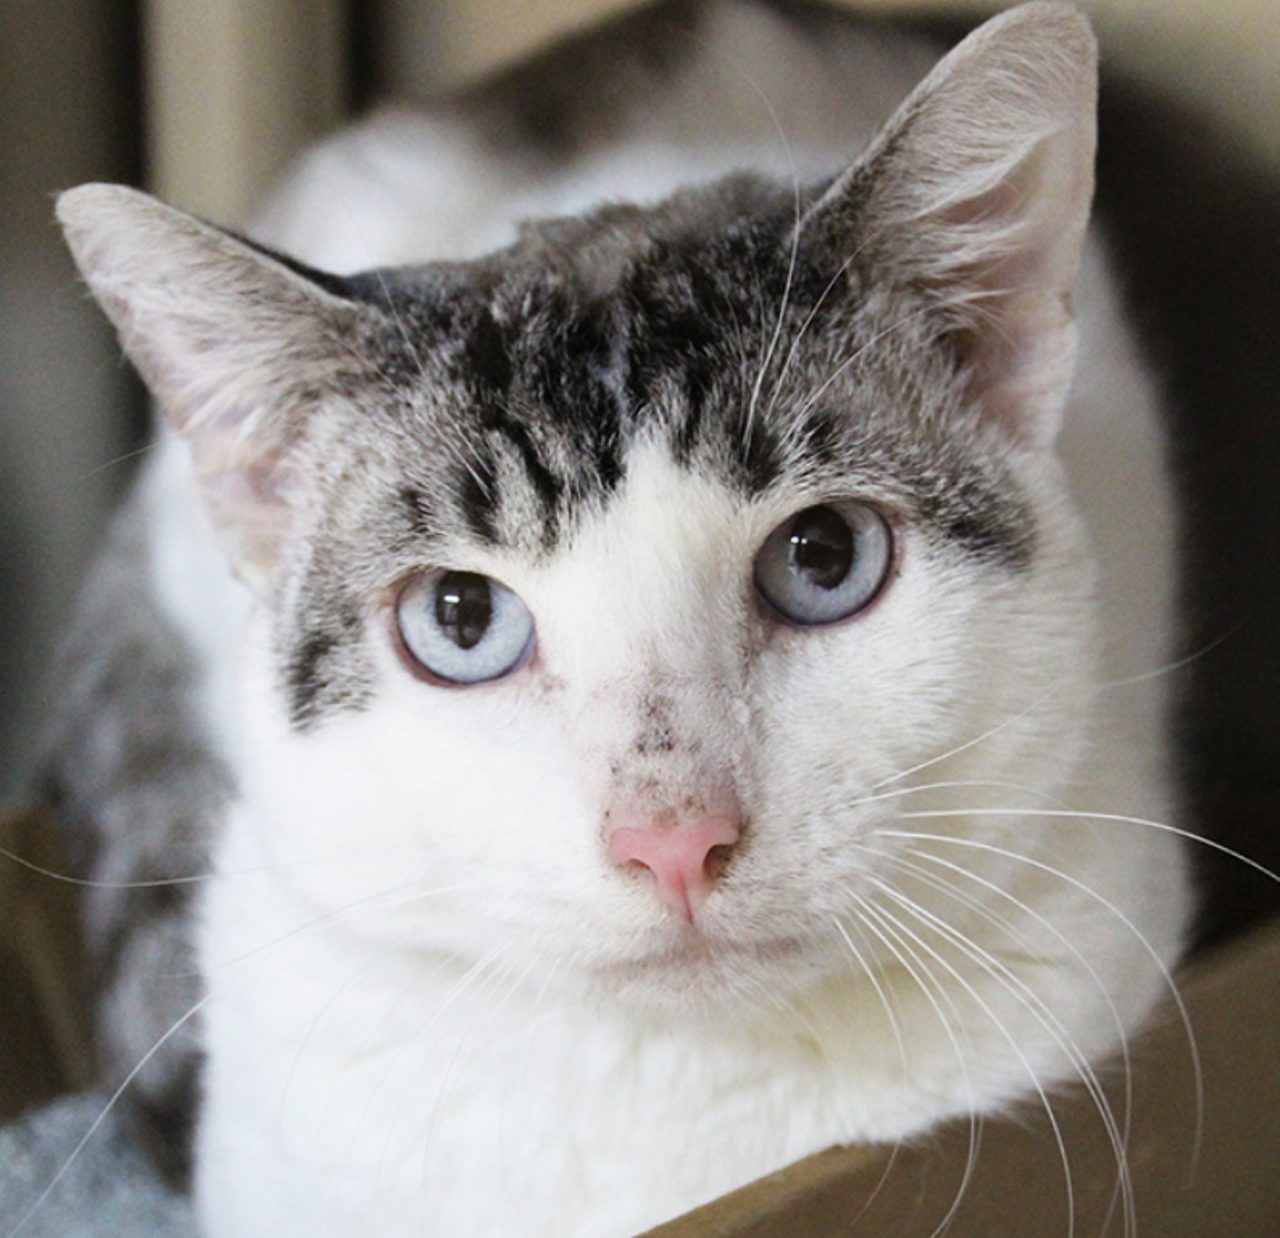 Paul
"I’m a handsome boy with beautiful eyes. I’m also a bit shy. My bashfulness is not too overwhelming and if you go slow I’ll warm right up to you. Once I do I turn into a purr machine. Please look past my timid personality and come adopt me today!"